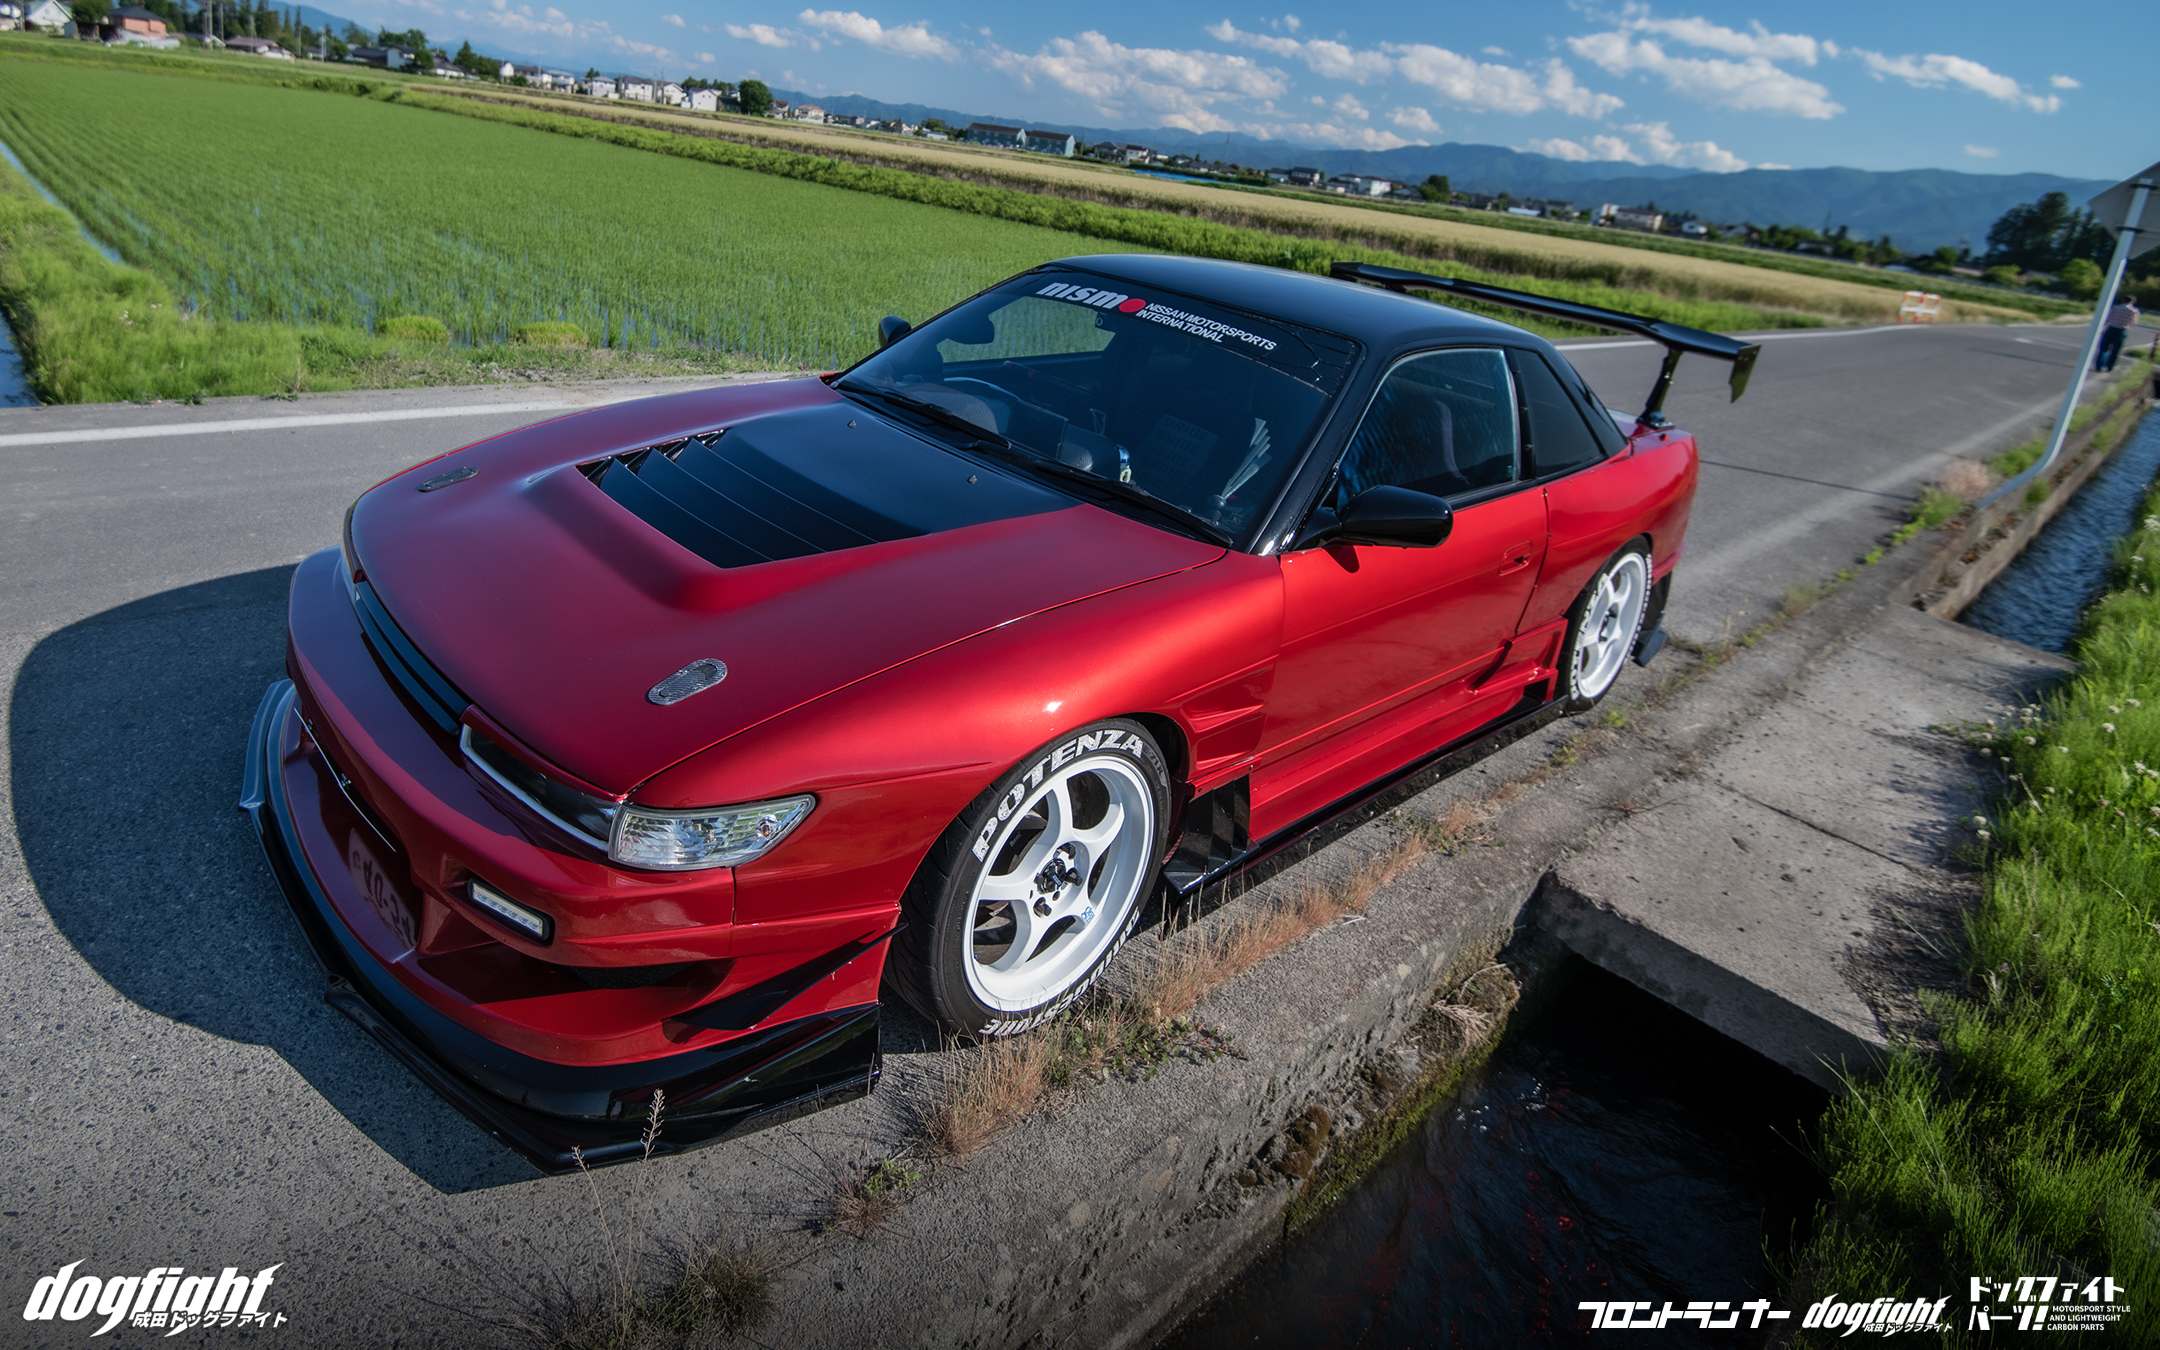 General 2160x1350 red cars sports car Nissan Silvia S13 bodykit Japan Japanese car spoiler Nissan Straight-four engine car vehicle Japanese cars frontal view headlights video game art screen shot video games sunlight